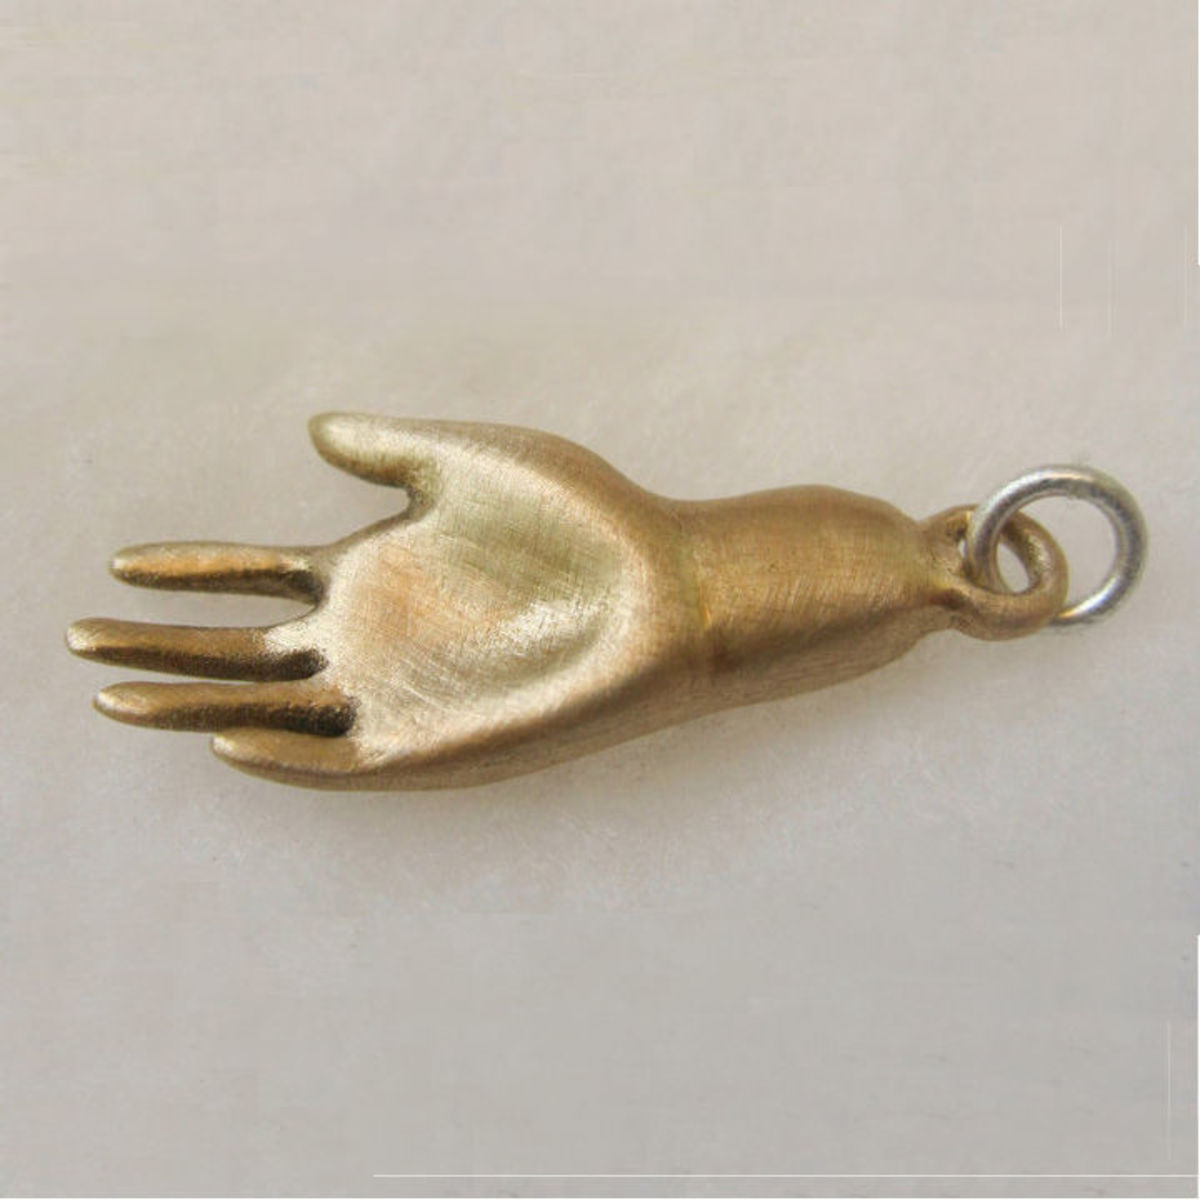 Bronze clay hand charm with a scratch-brushed finish to add surface texture interest. Polishing it to a high shine would have given it a very different look.